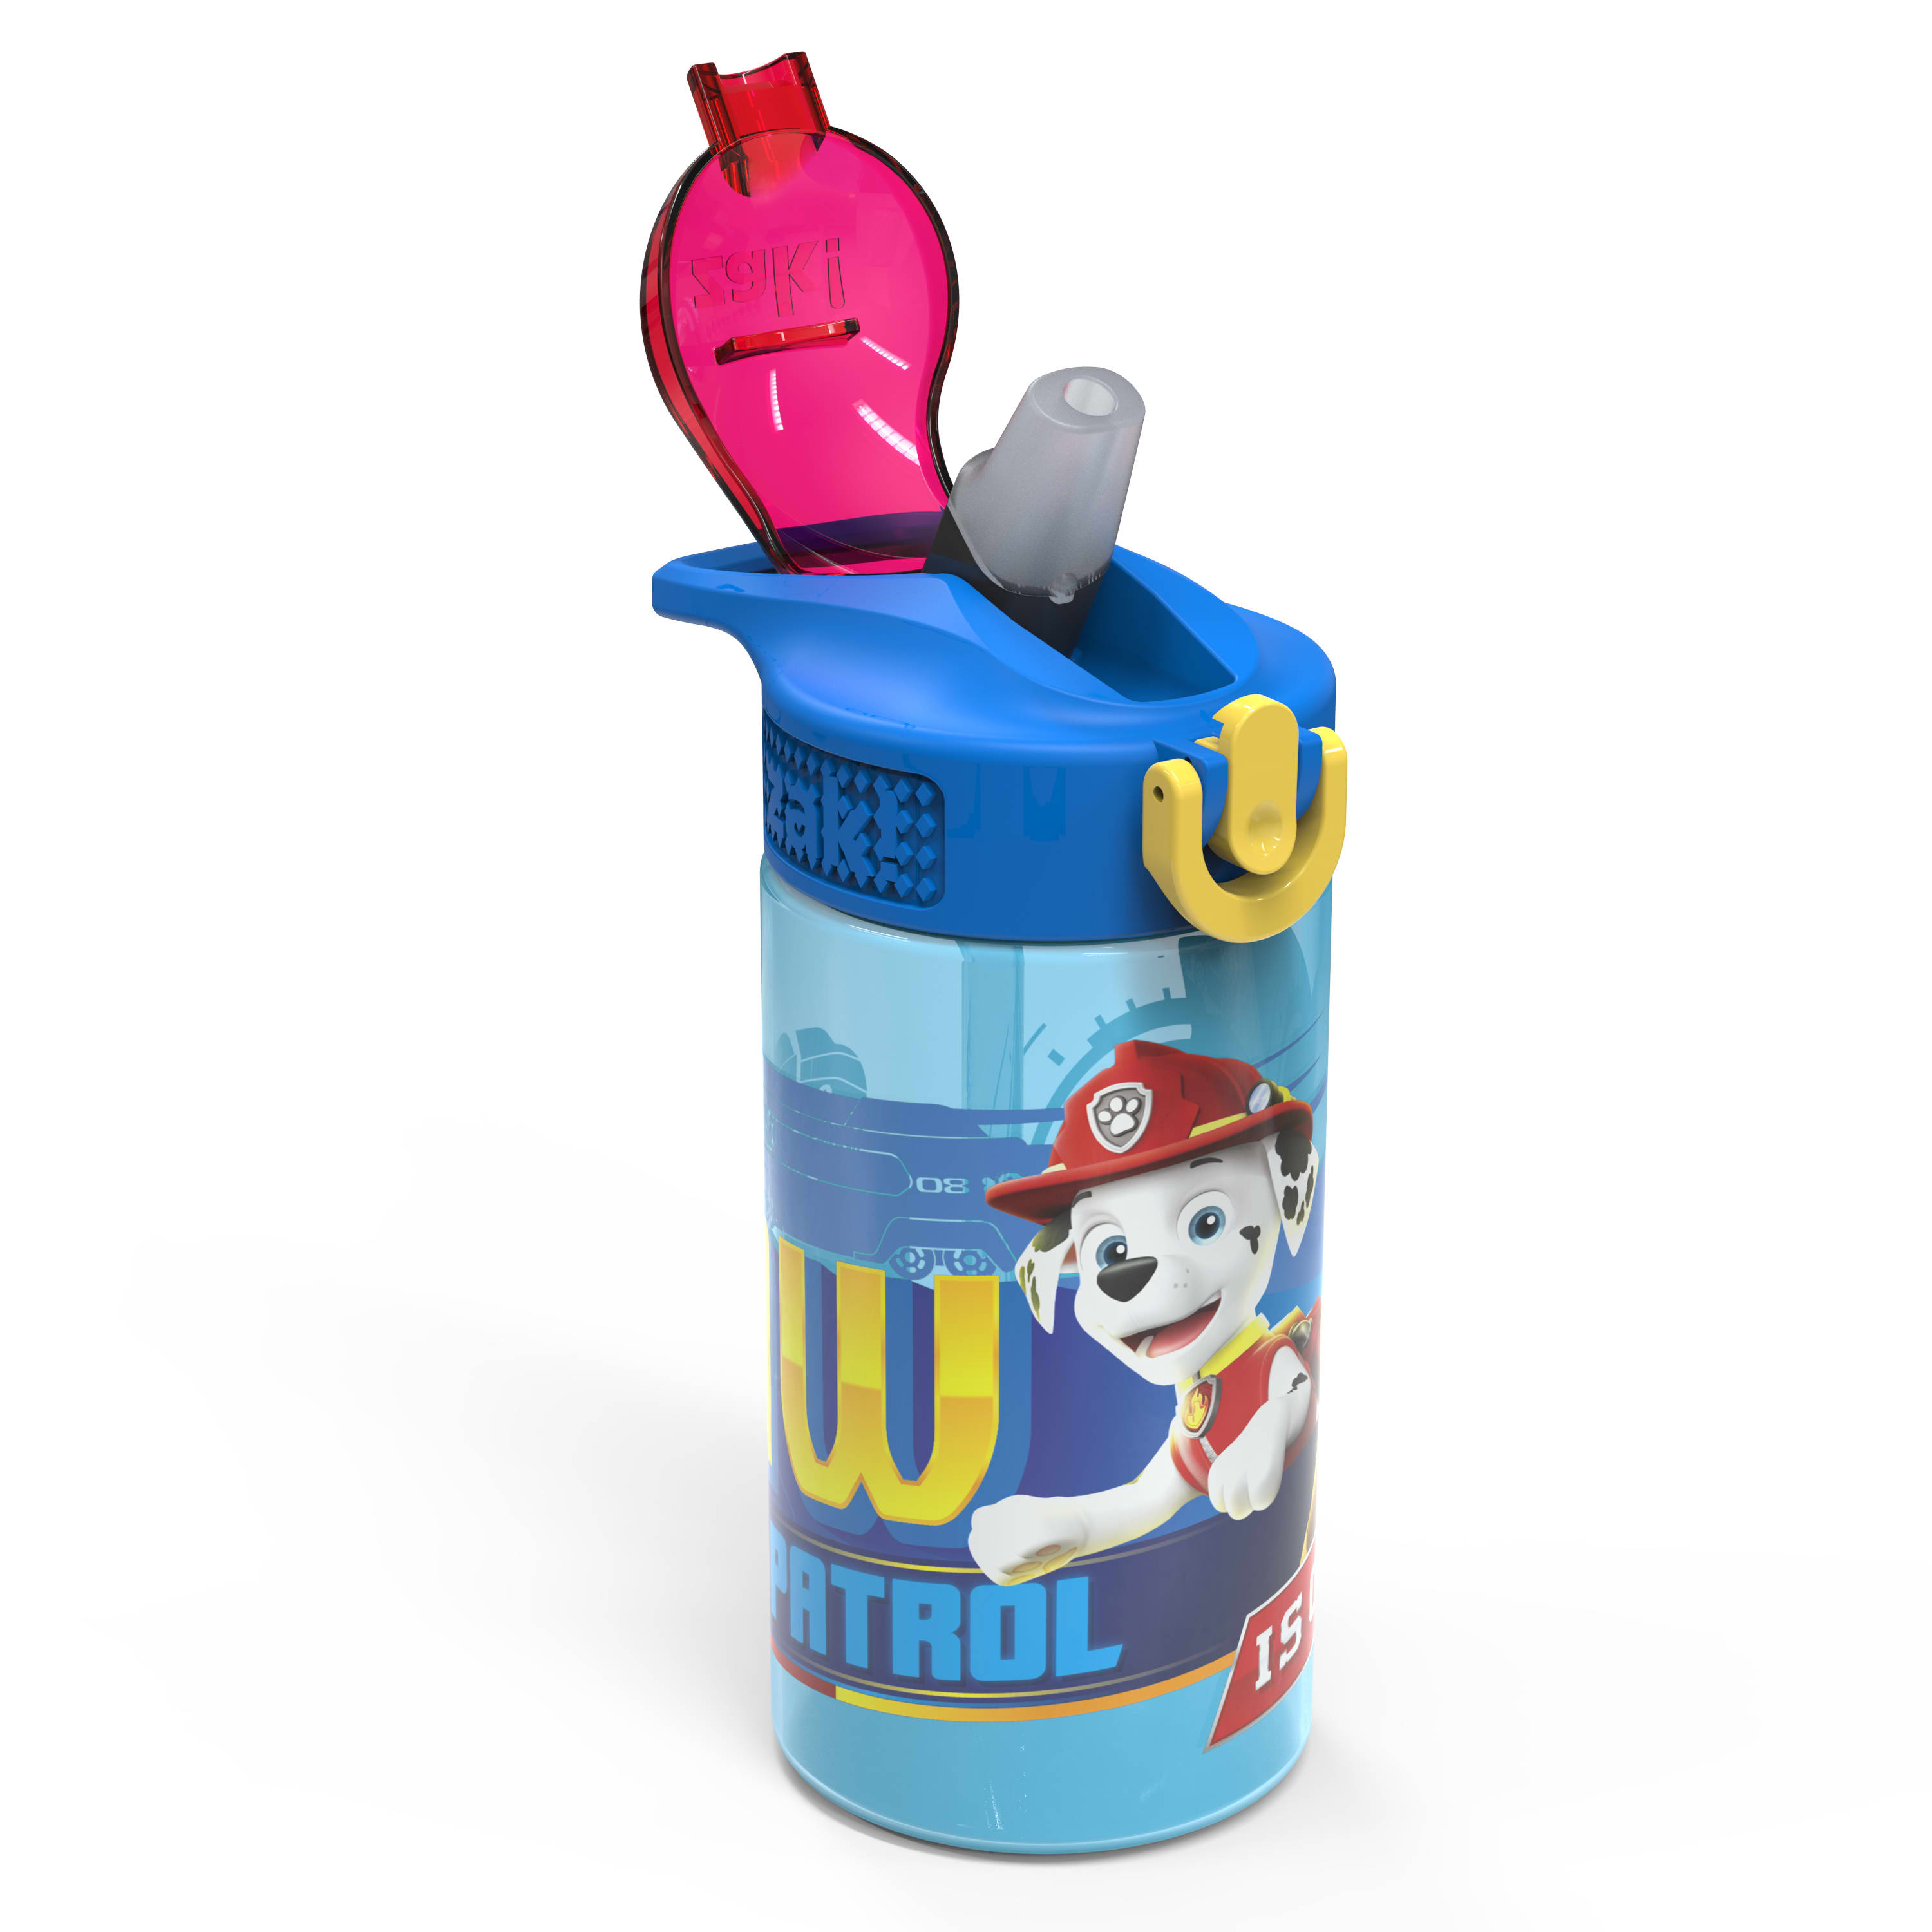 Zak Designs Paw Patrol 16 Ounce Reusable Plastic Water Bottle, Chase and Marshall - image 4 of 8